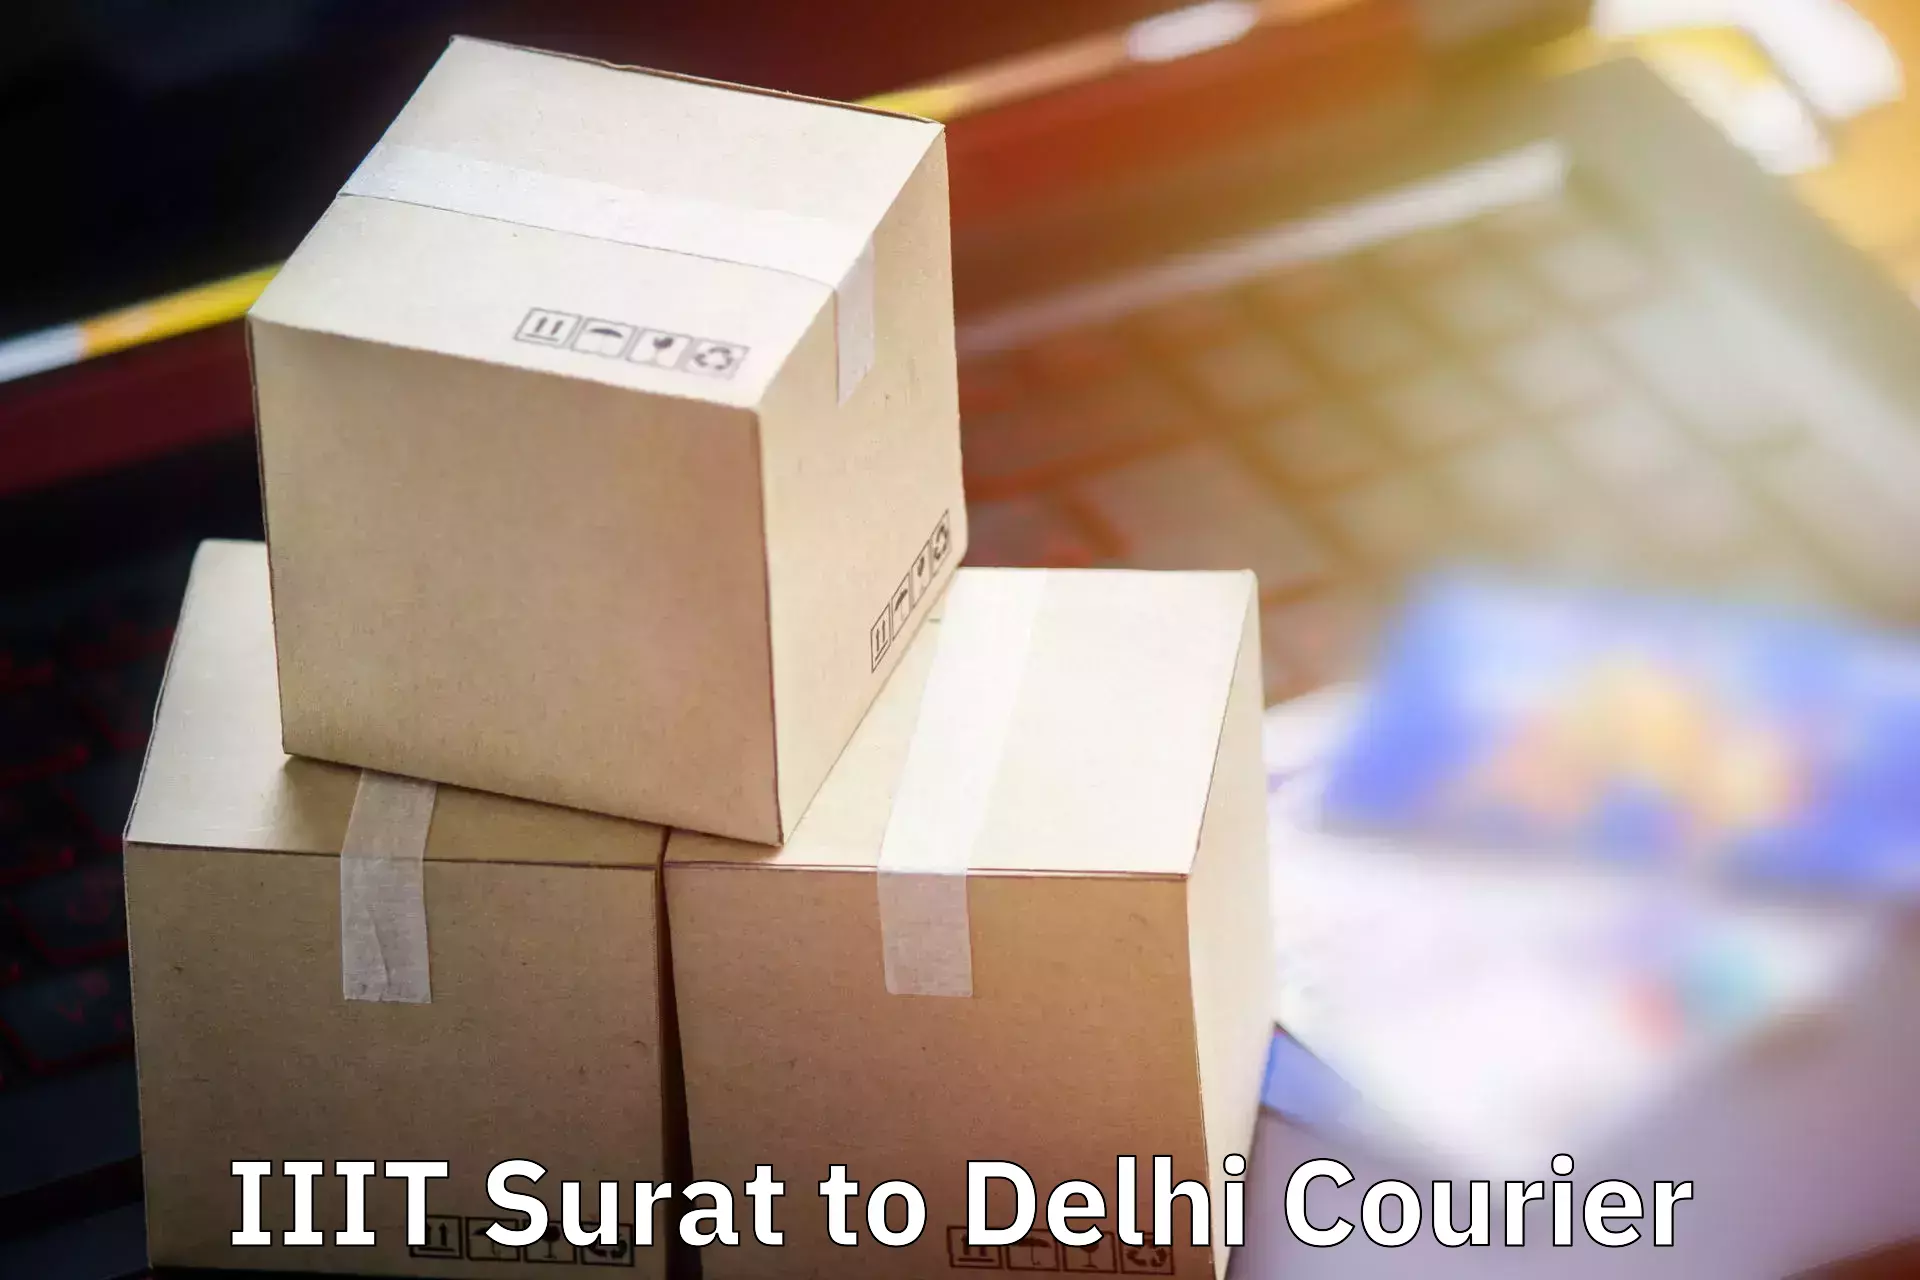 Baggage relocation service IIIT Surat to Lodhi Road